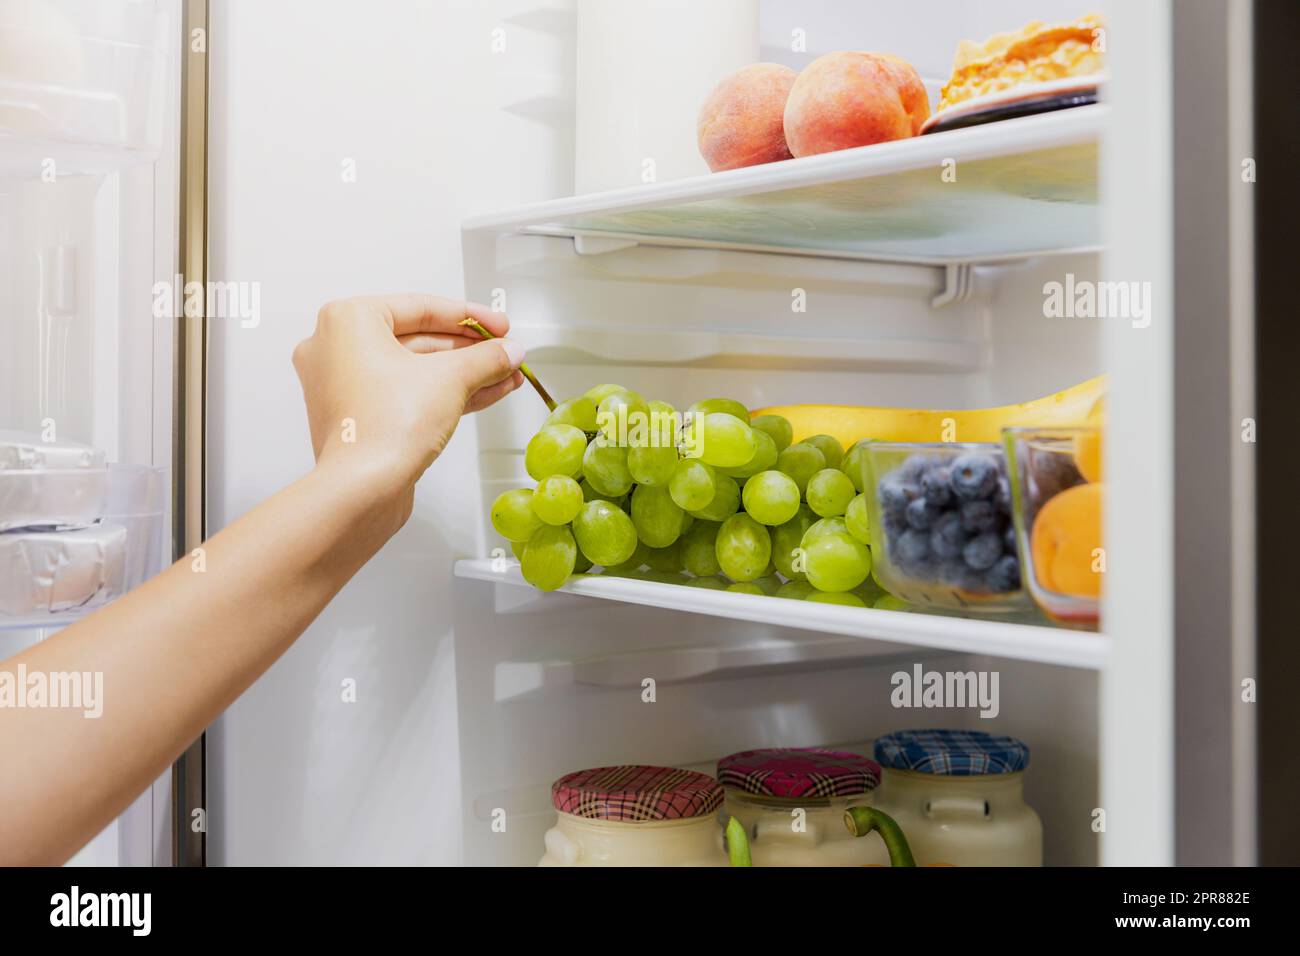 Woman hand taking or picks up bunch of grapes out of open refrigerator or fridge Stock Photo